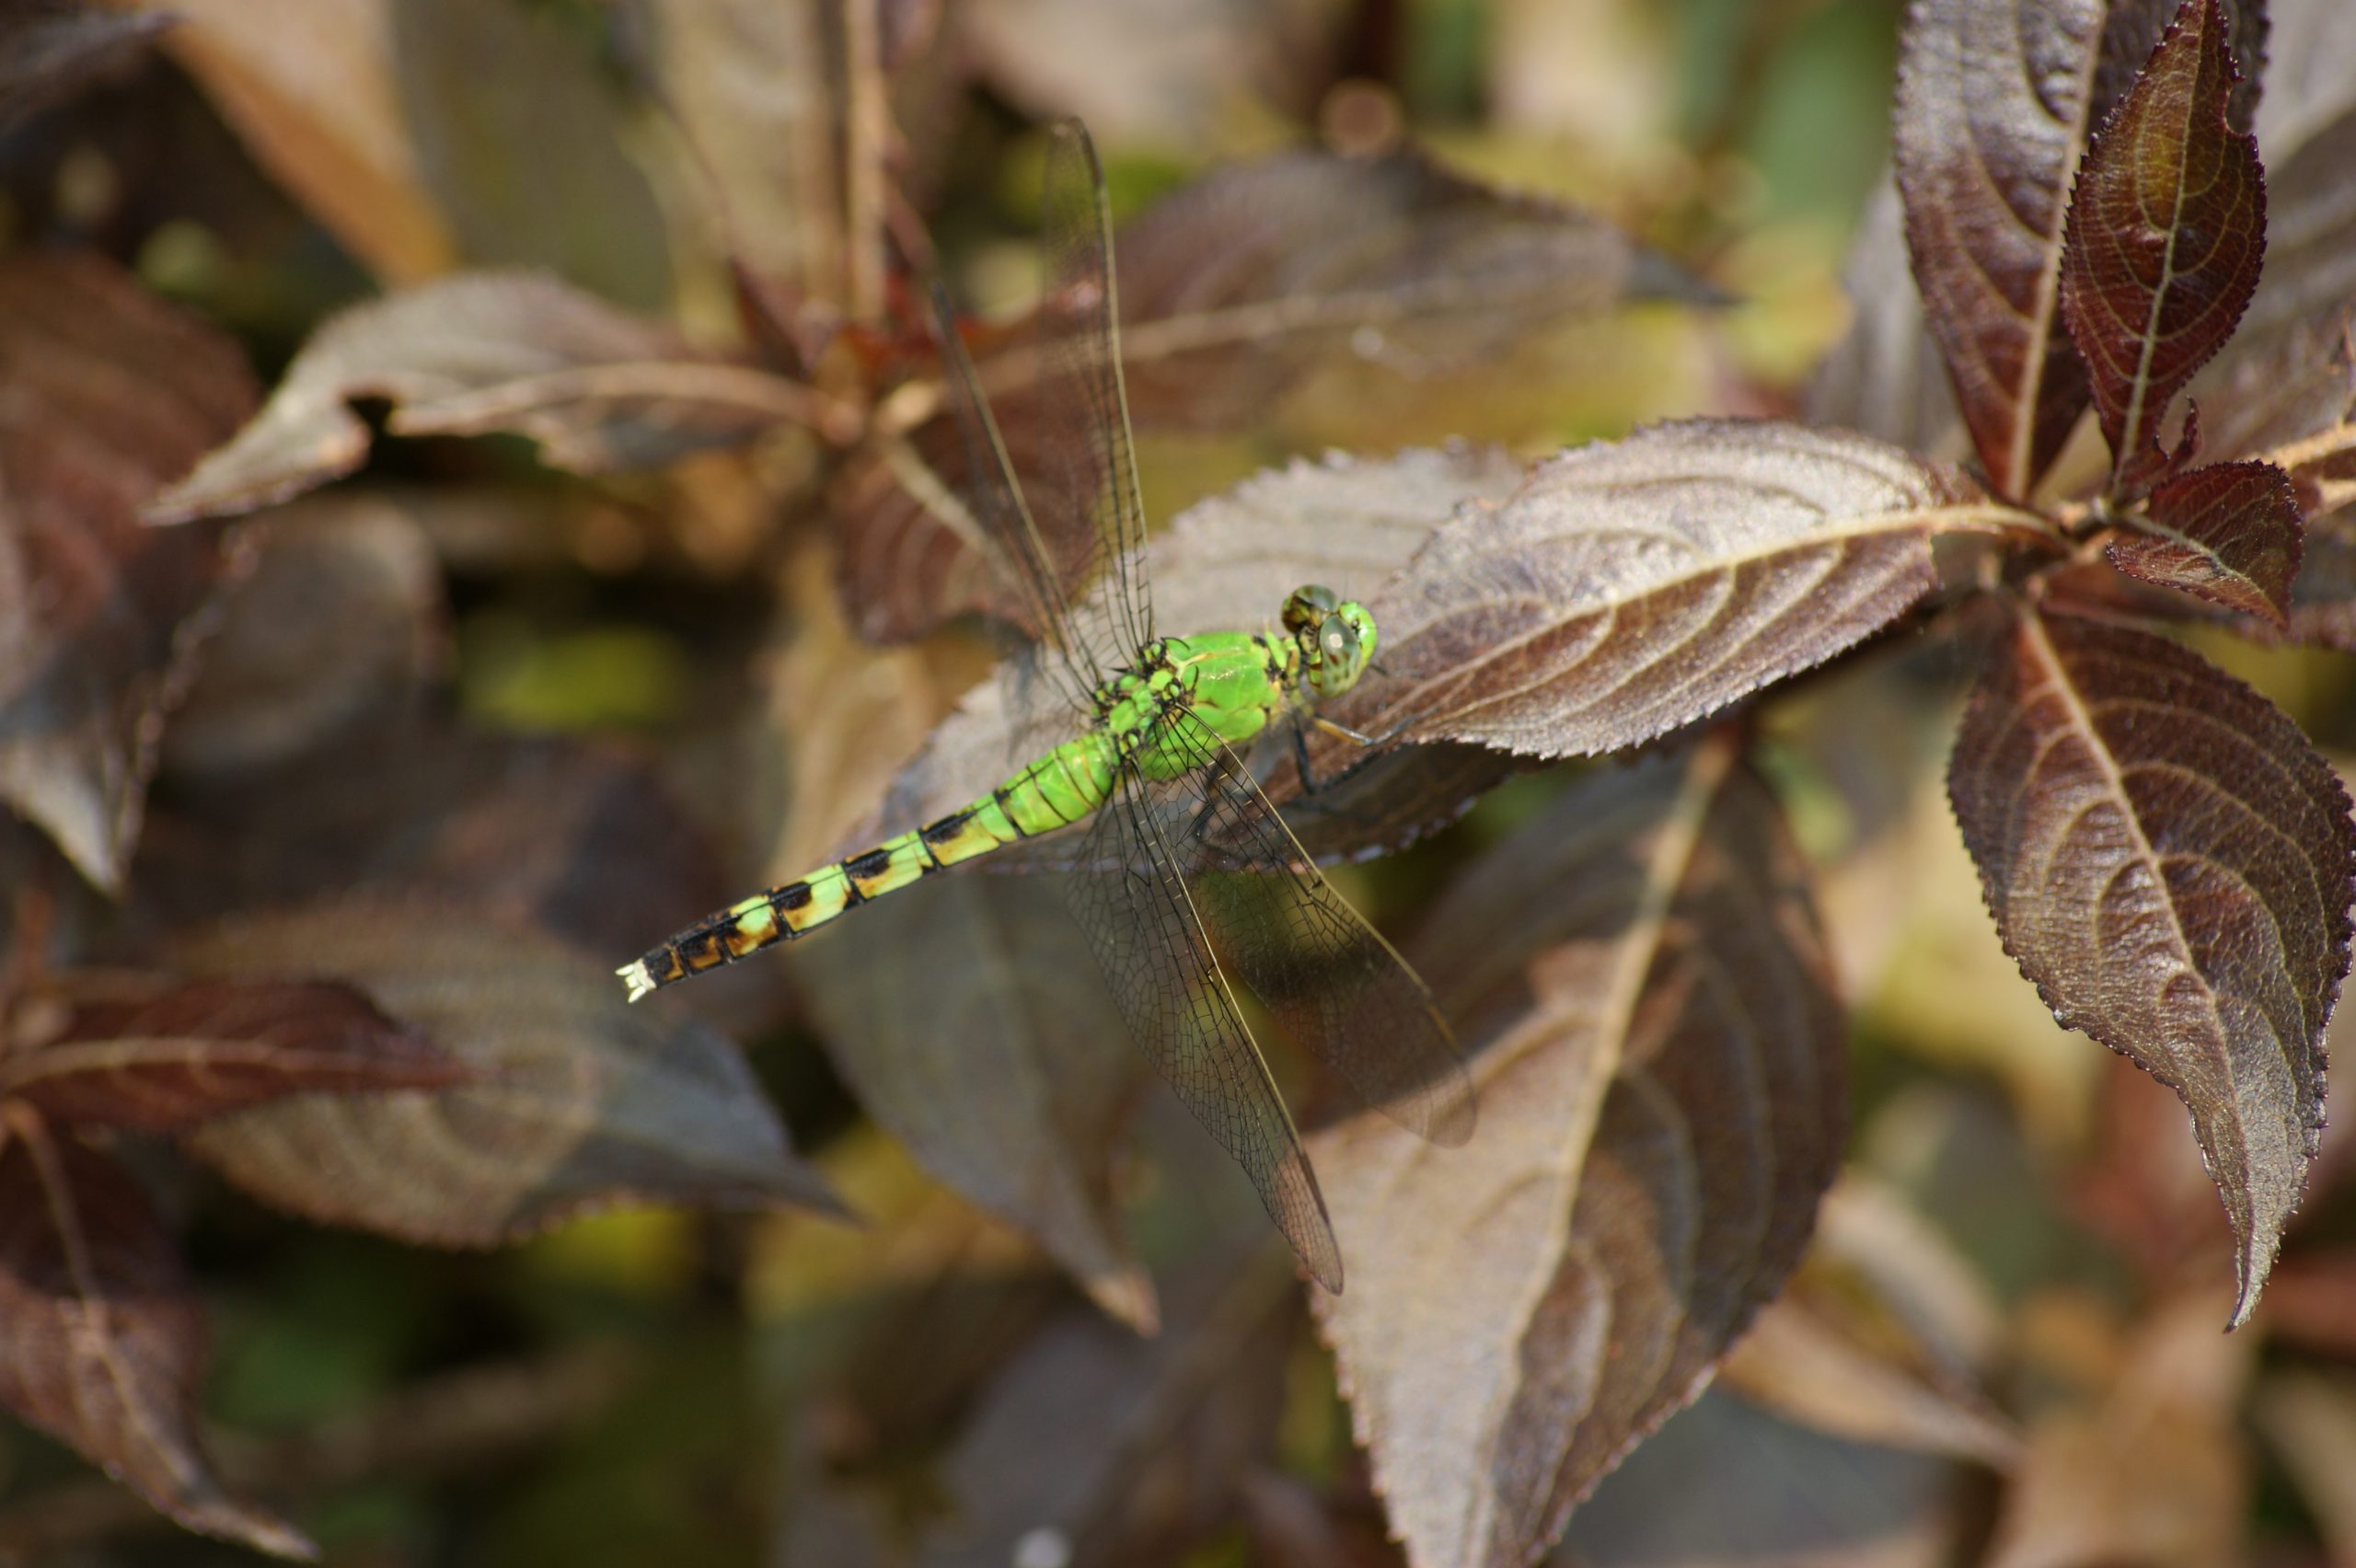 Green Dragonfly (user submitted)